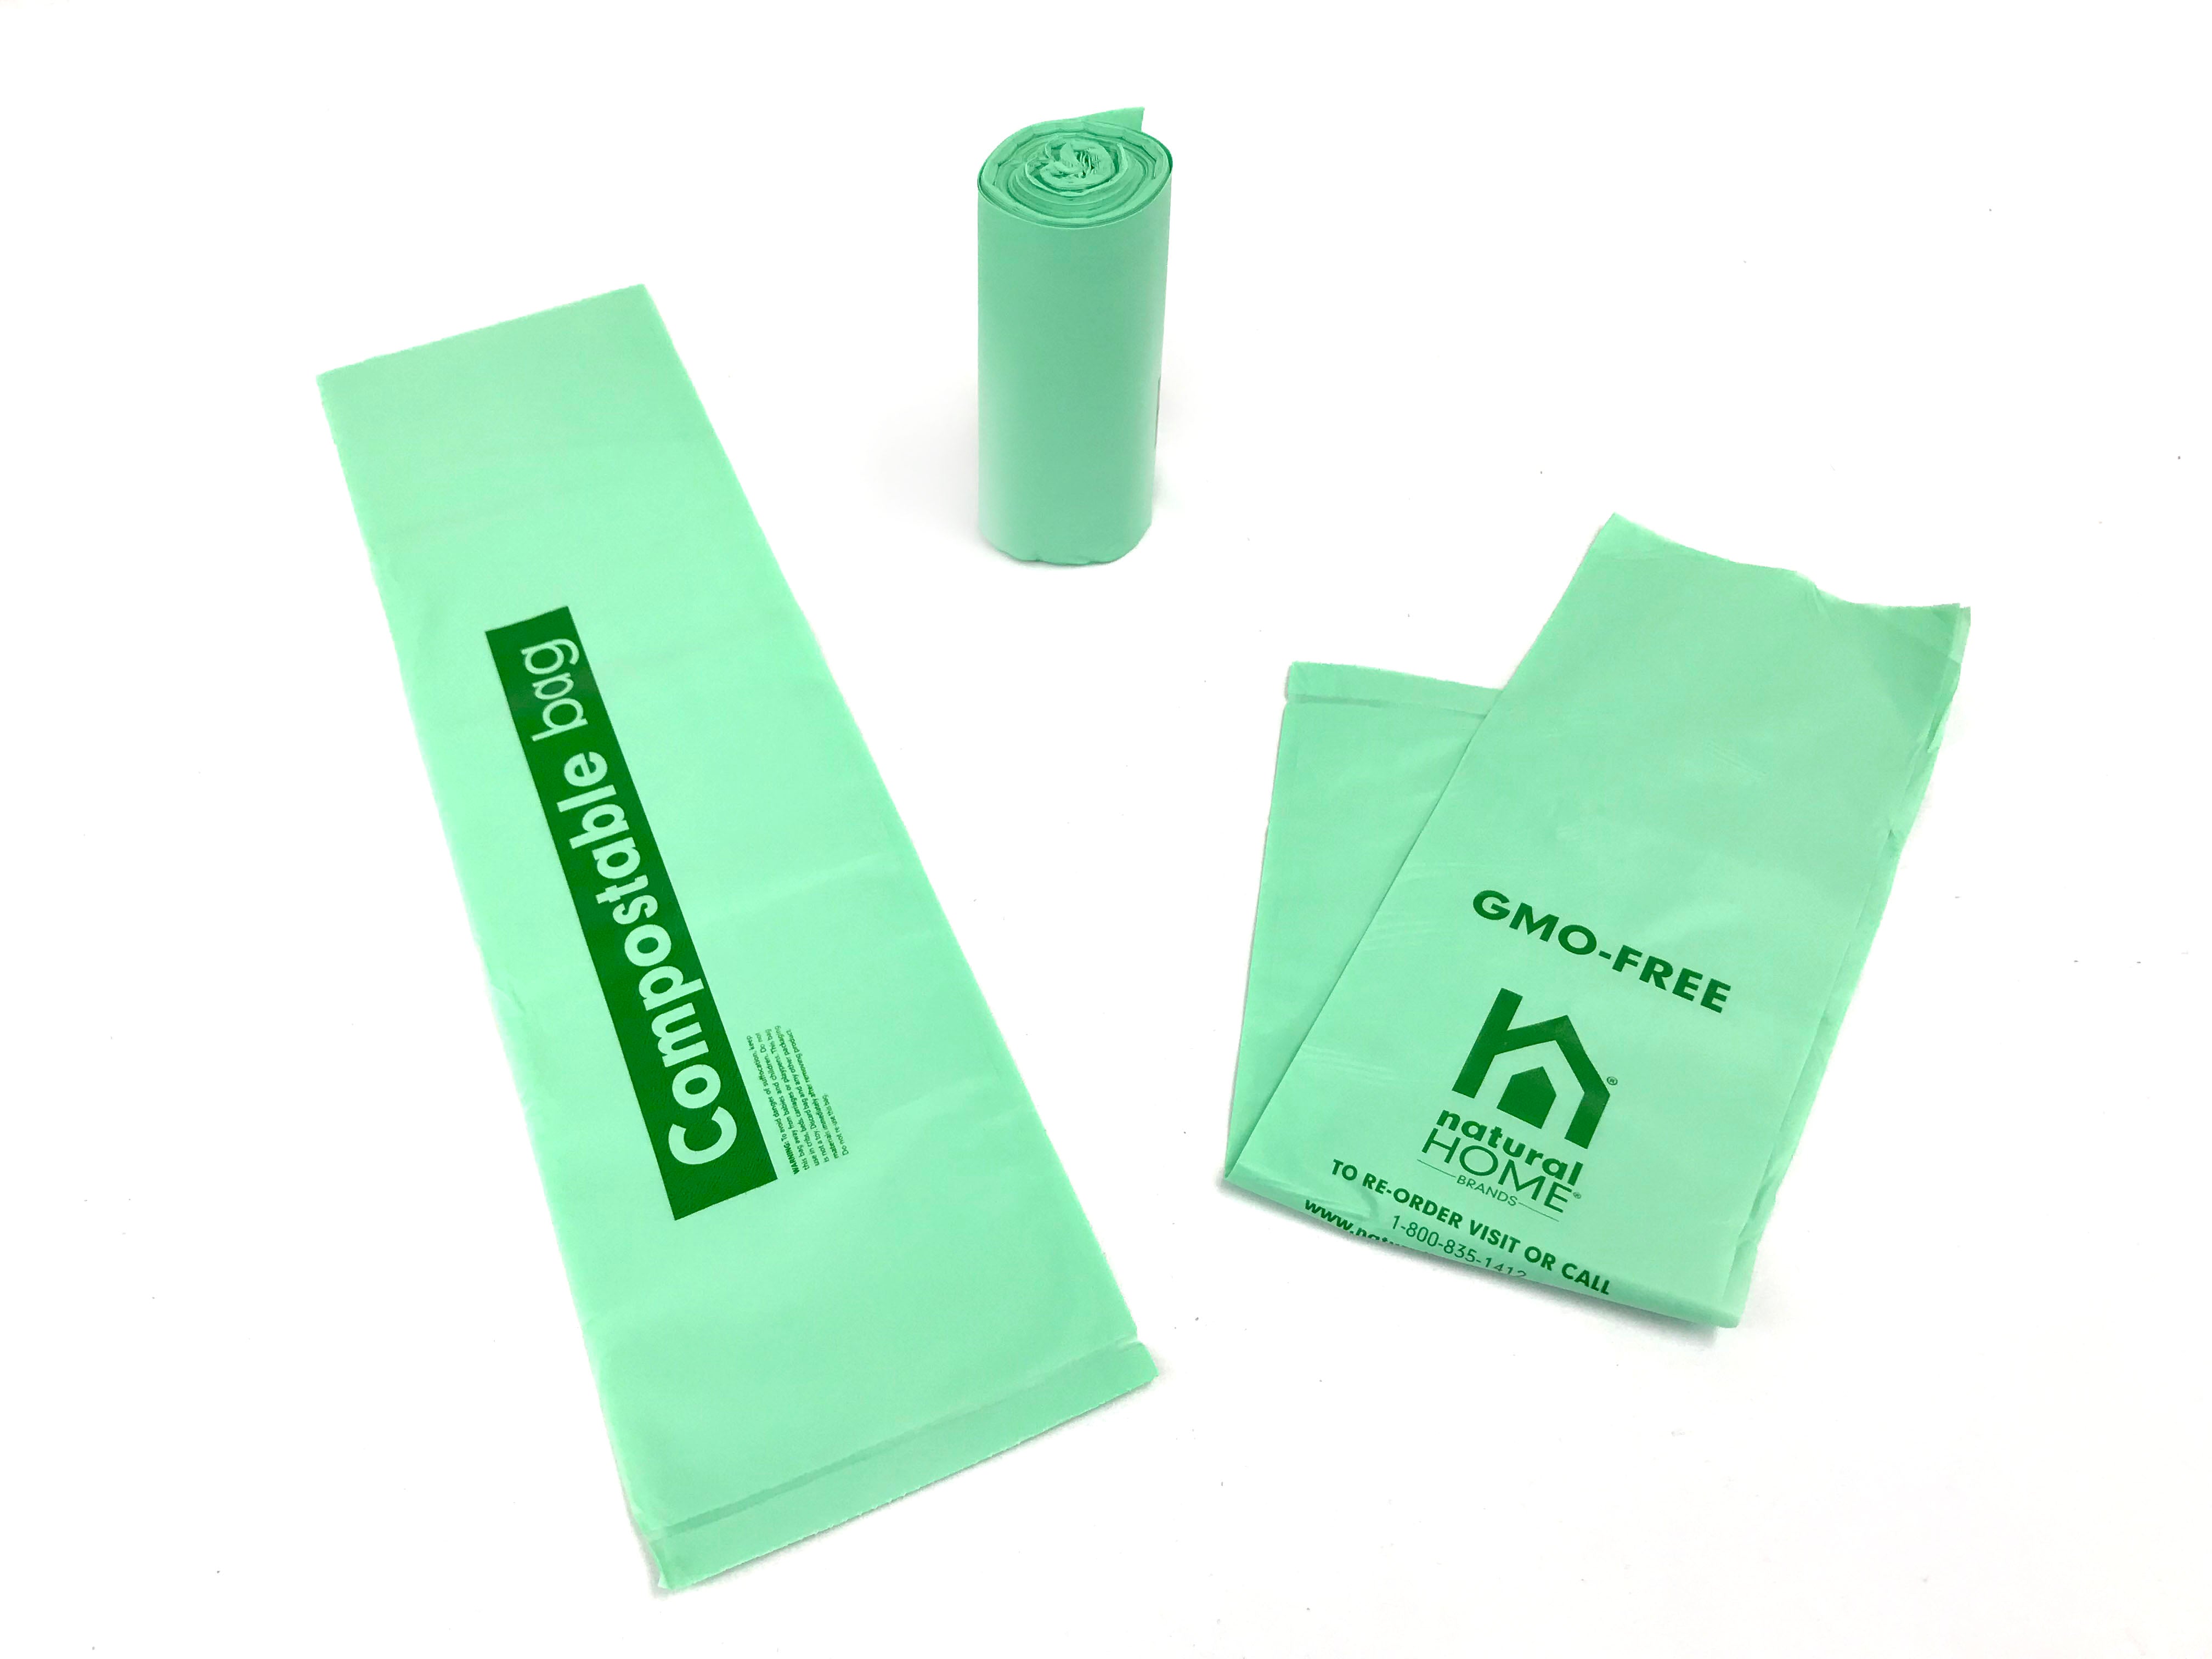 Natur-Bag Compostable Liners Green-Slim 33 Gallons 0.8 mm 33 in. x 40 in. 25 Liners per Roll 8